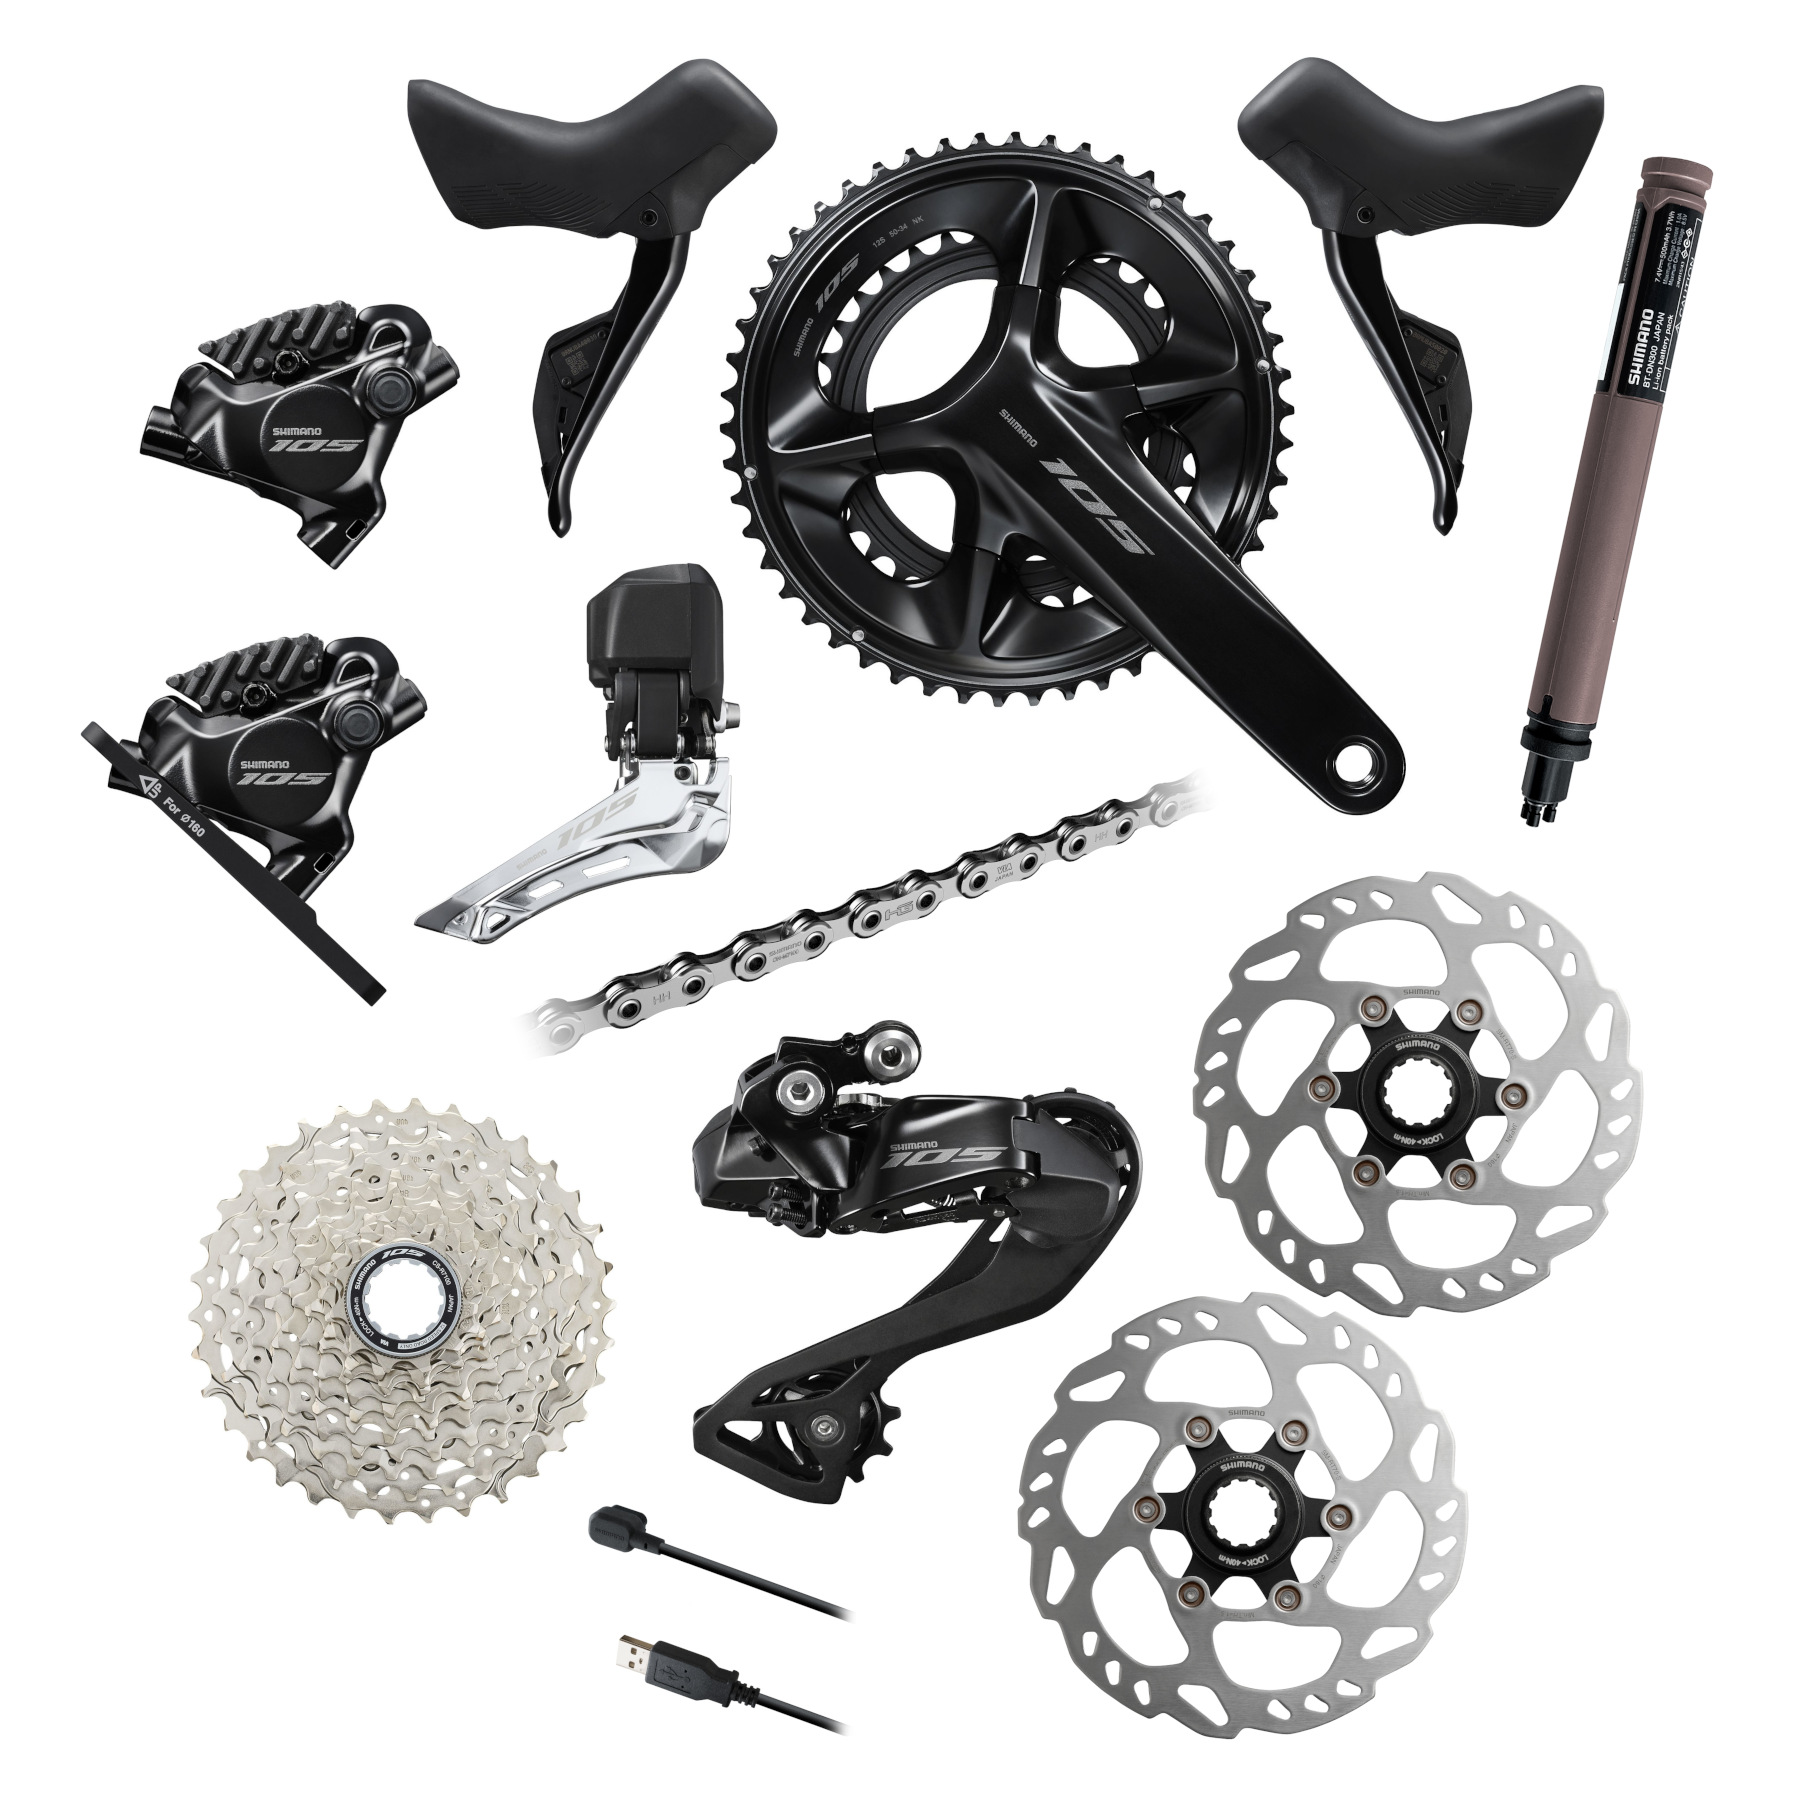 Picture of Shimano 105 R7100/R7150 Groupset - Di2 | 2x12-speed